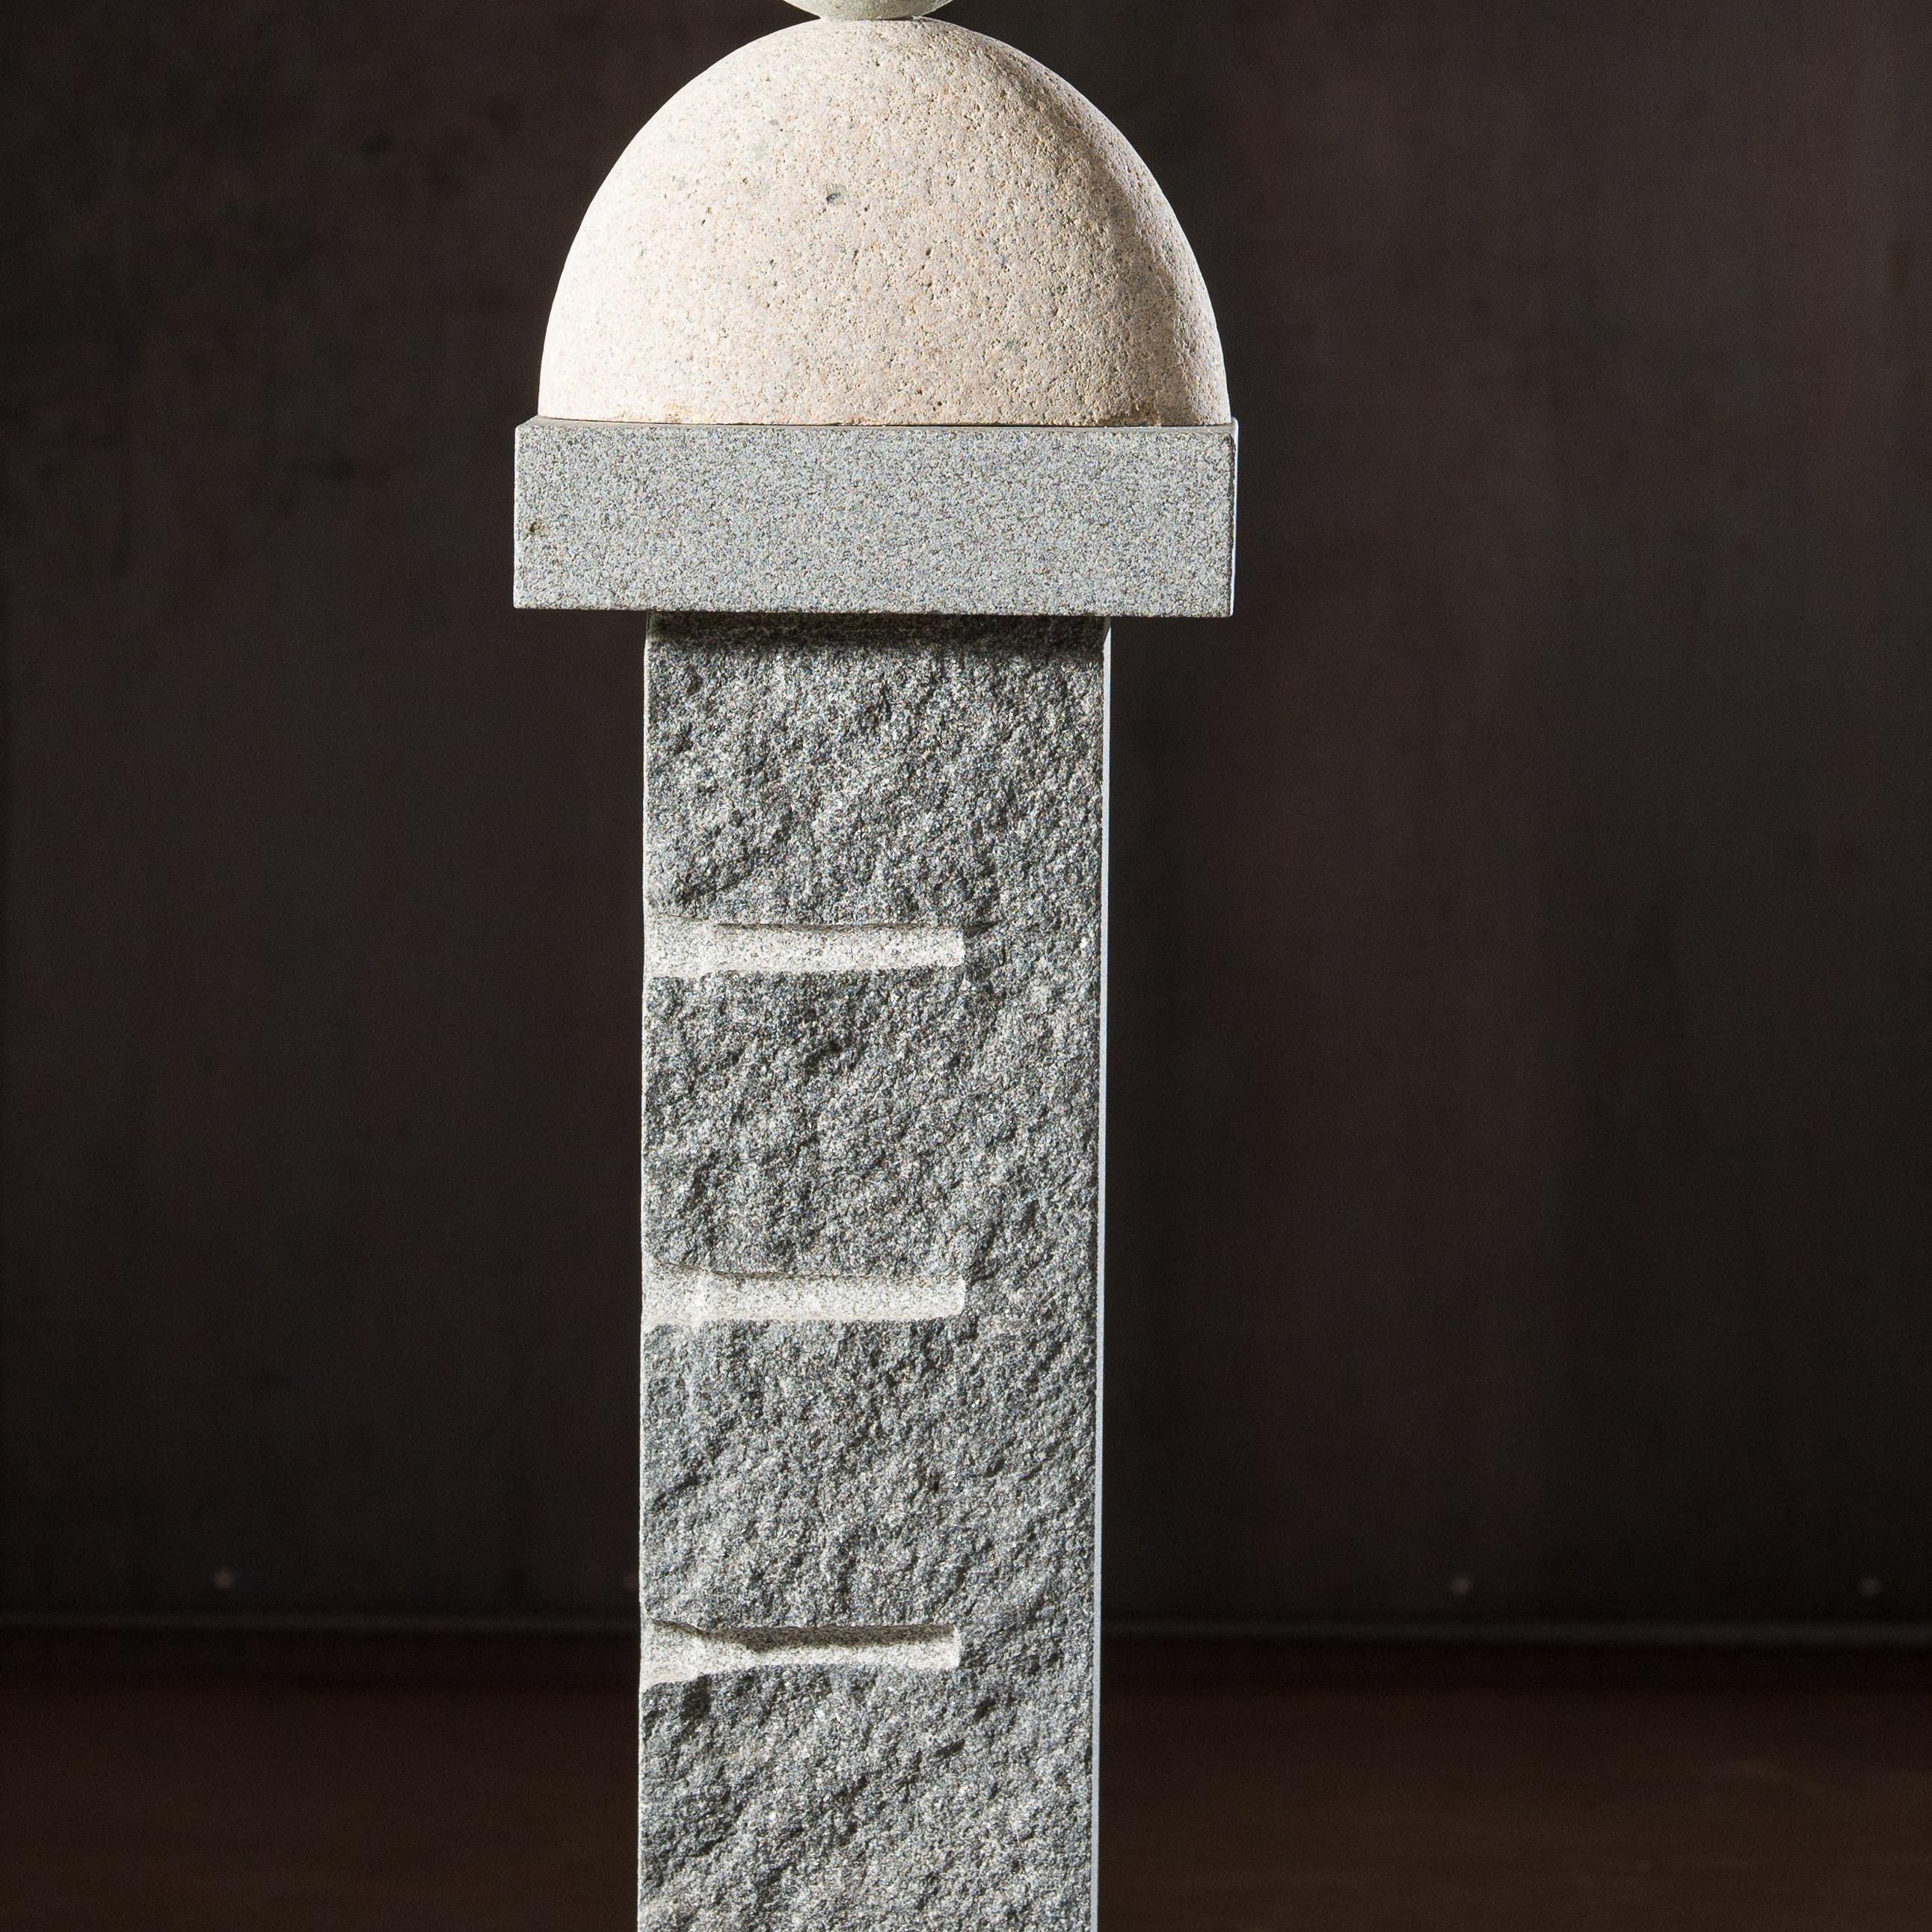 stone

b. 1949, Washington, DC

For the past twenty-five years, Woods Davy has worked with natural elements, chanelling Zen ideas about oneness and harmony with nature. Davy arranges various types of stone in tensely balanced vertical constructions.